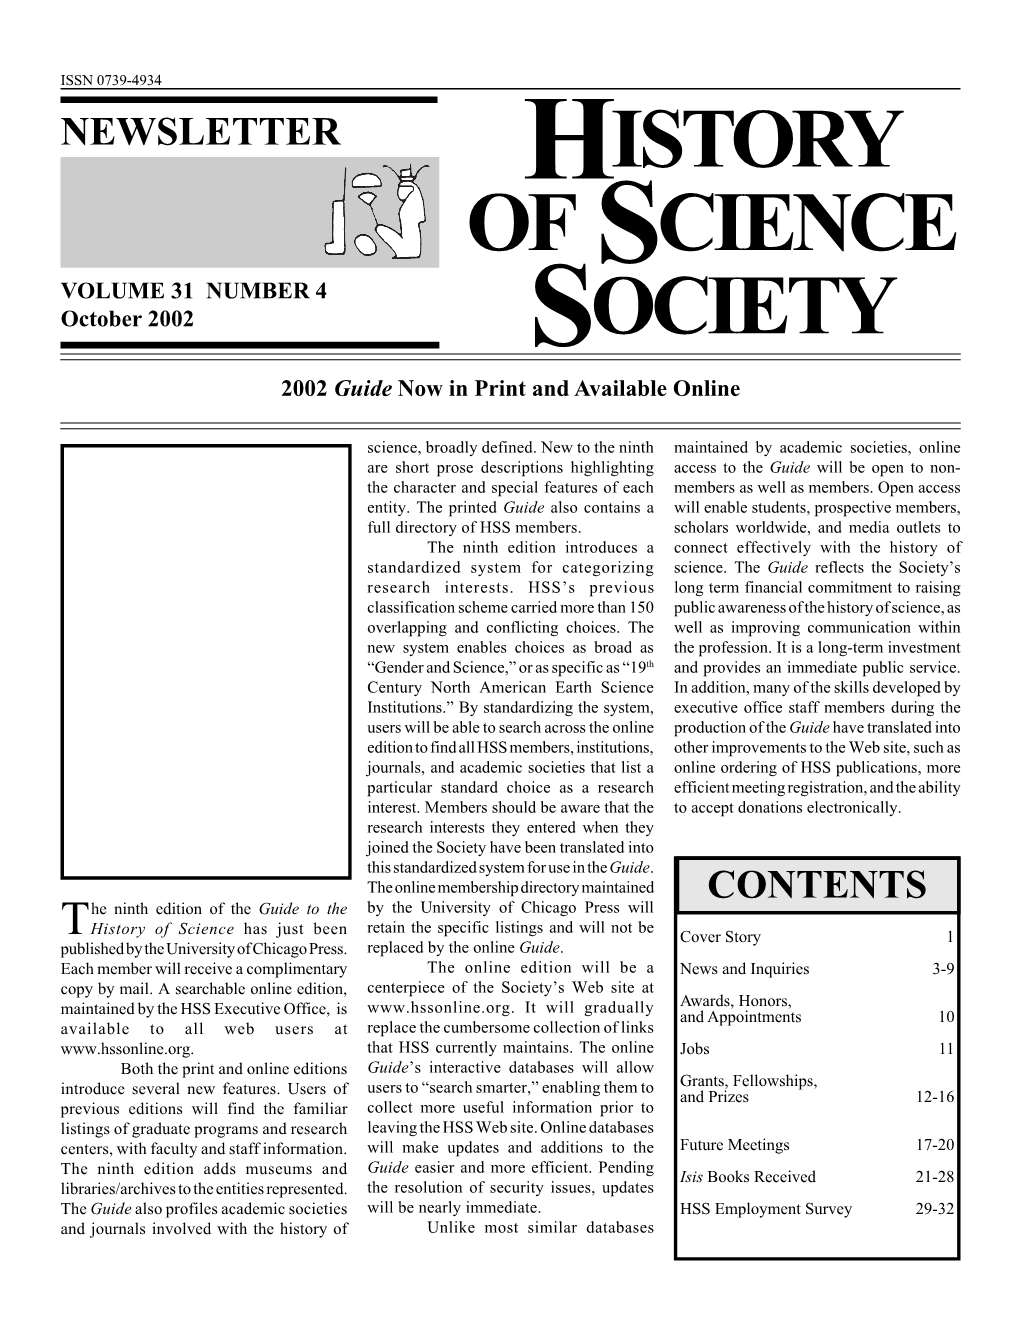 History of Science Society Newsletter October 2002